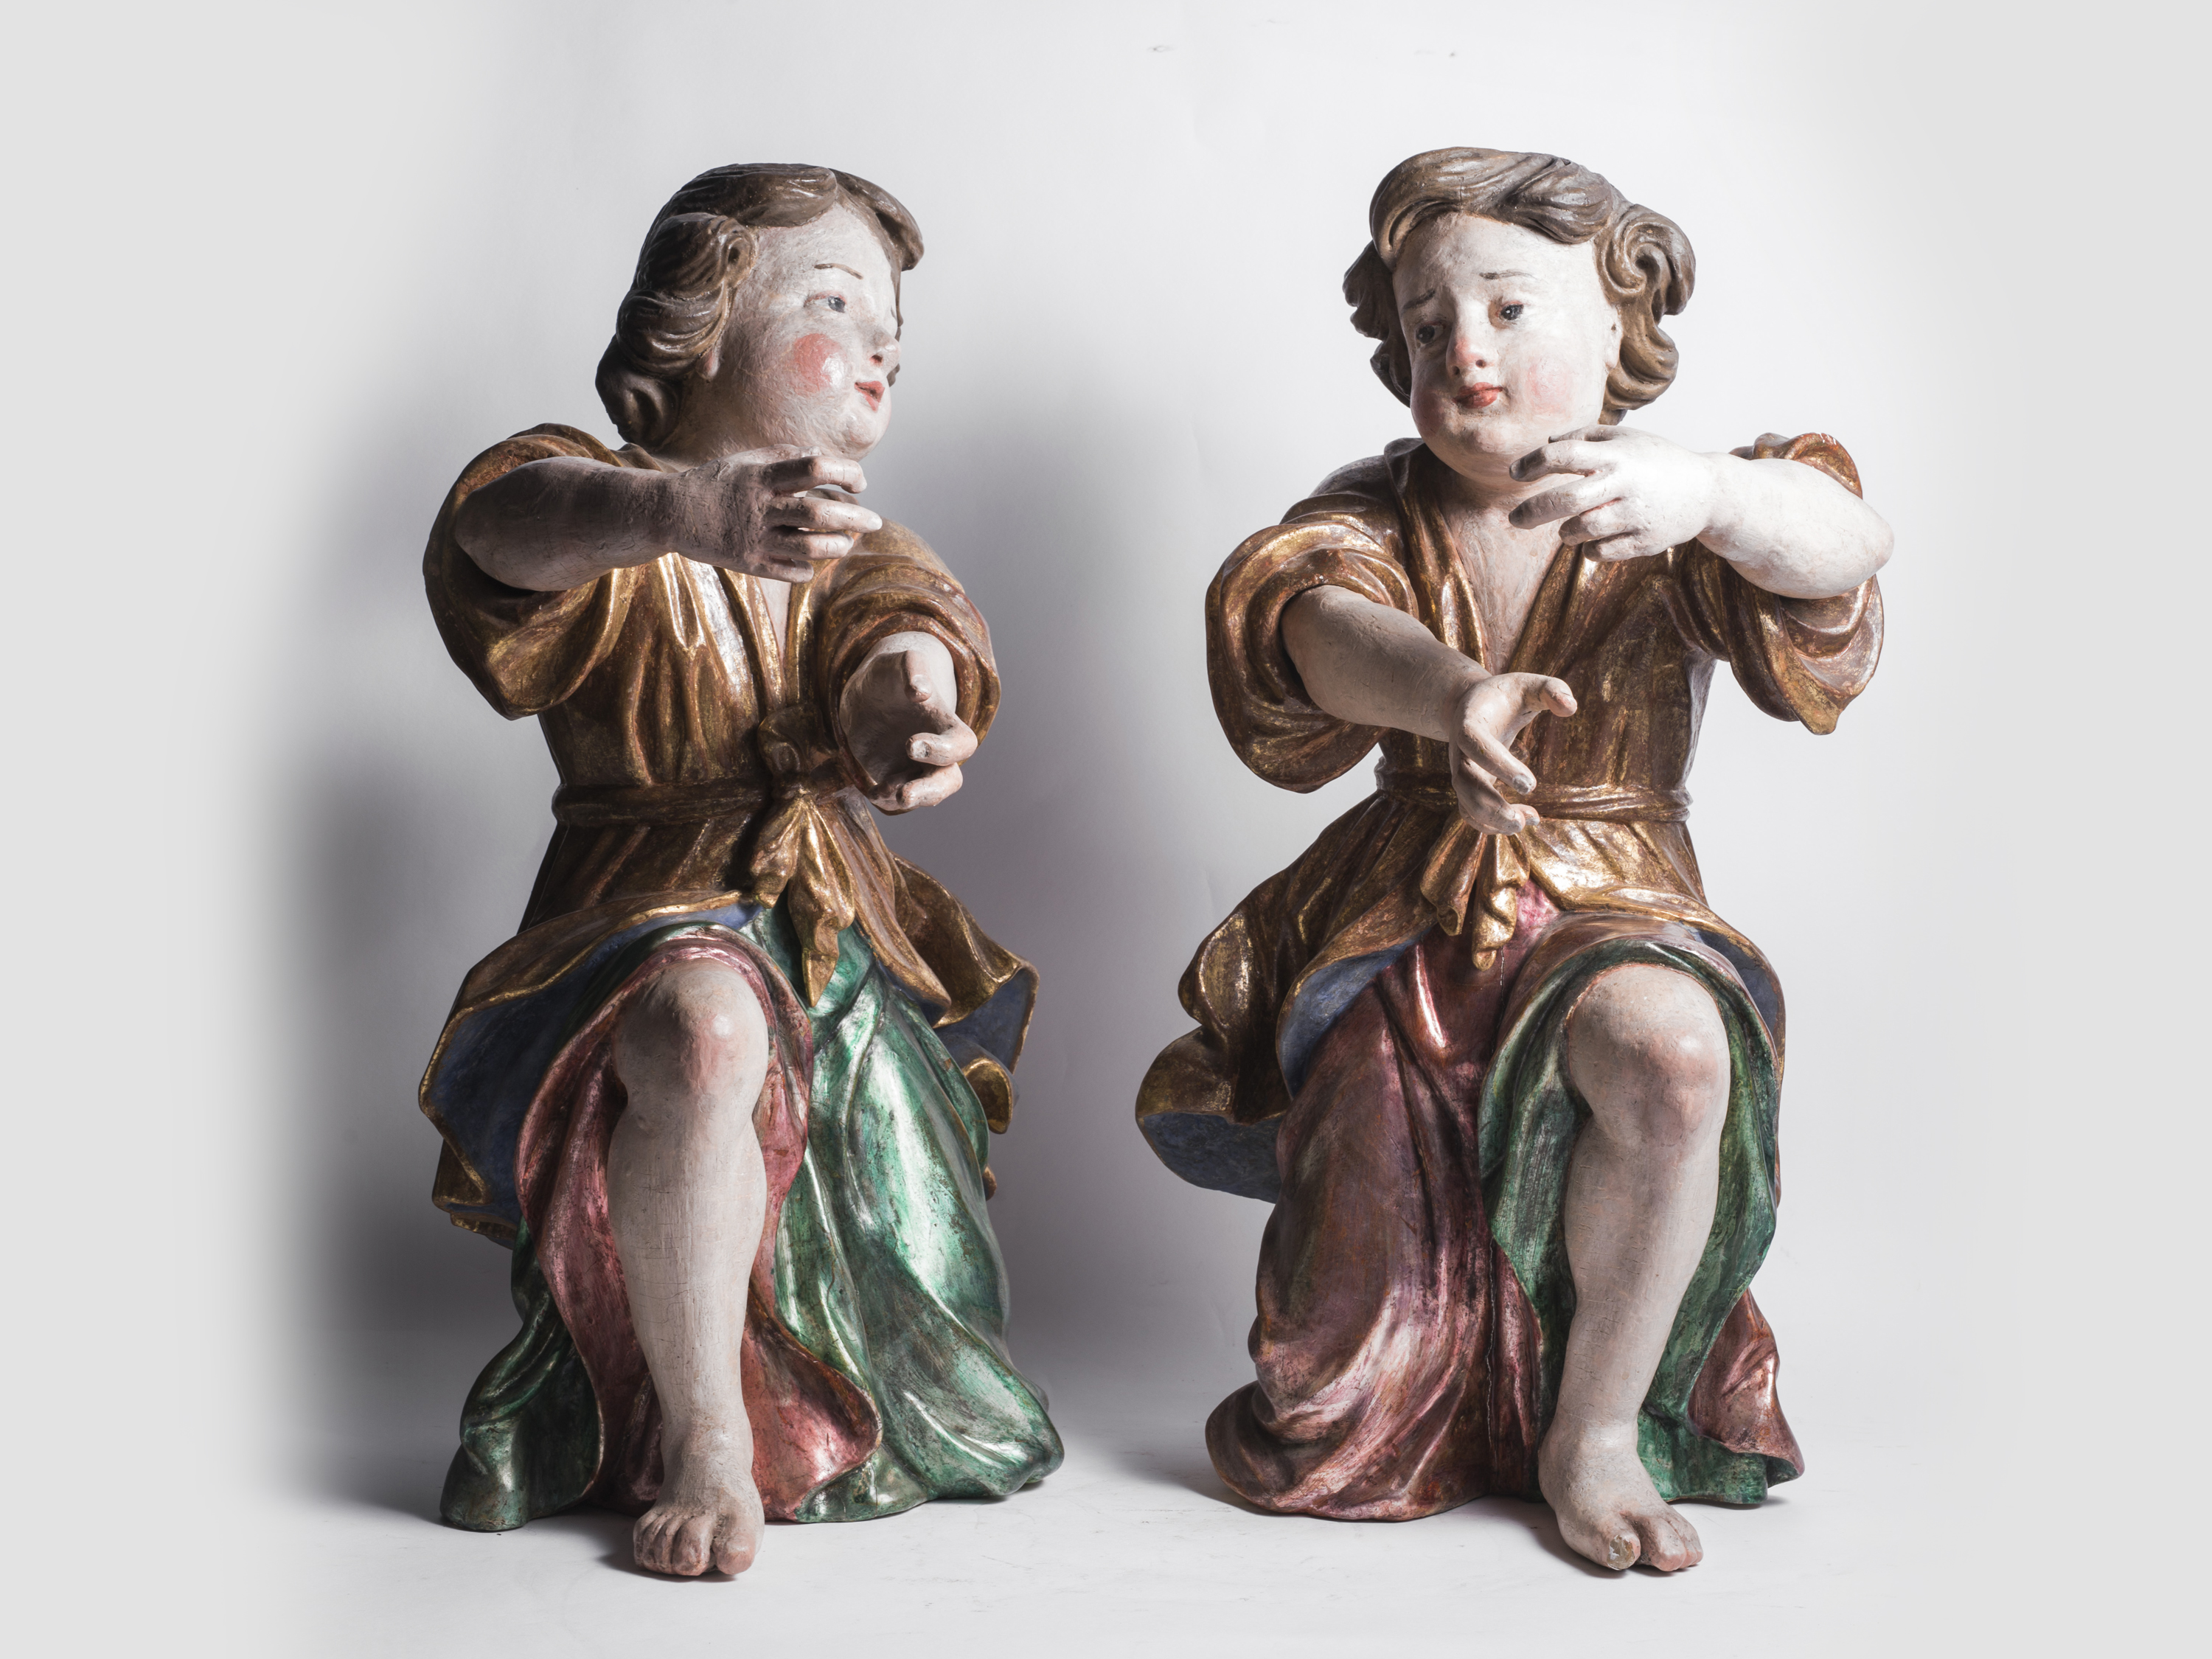 Pair of sconce angels, South German, Baroque, 17th/18th century